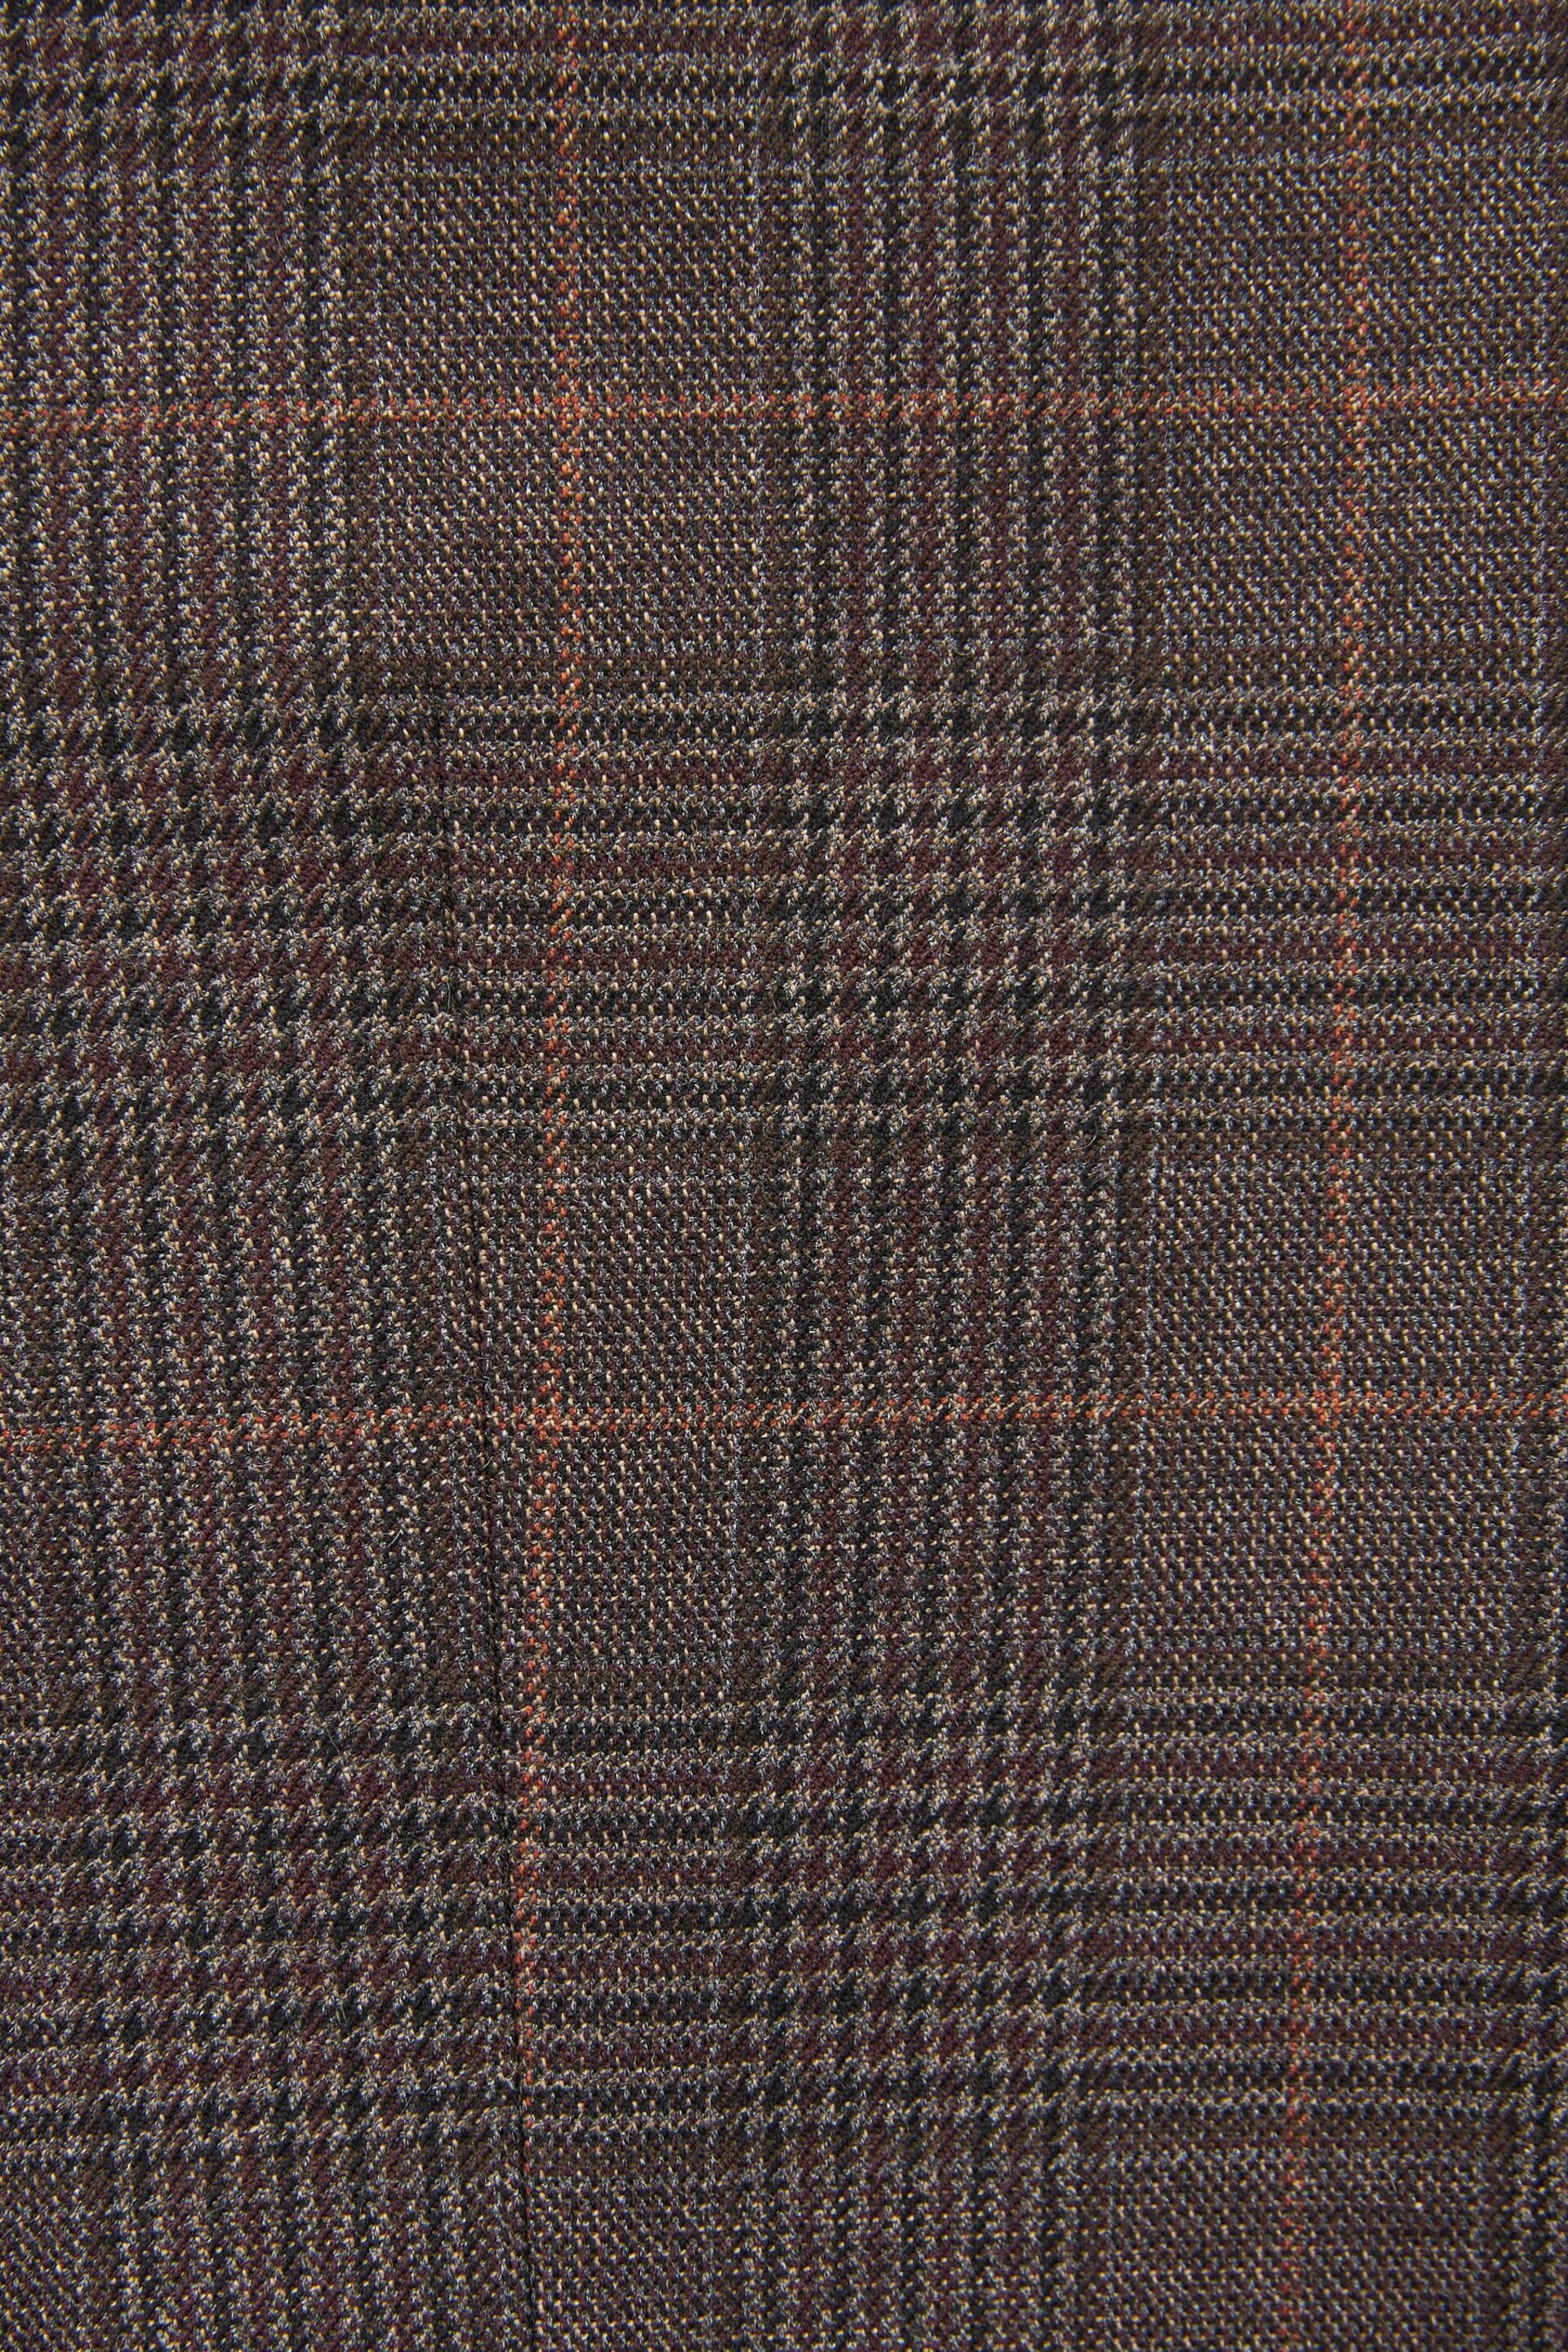 Brown Slim Trimmed Check Suit: Waistcoat - Image 12 of 12